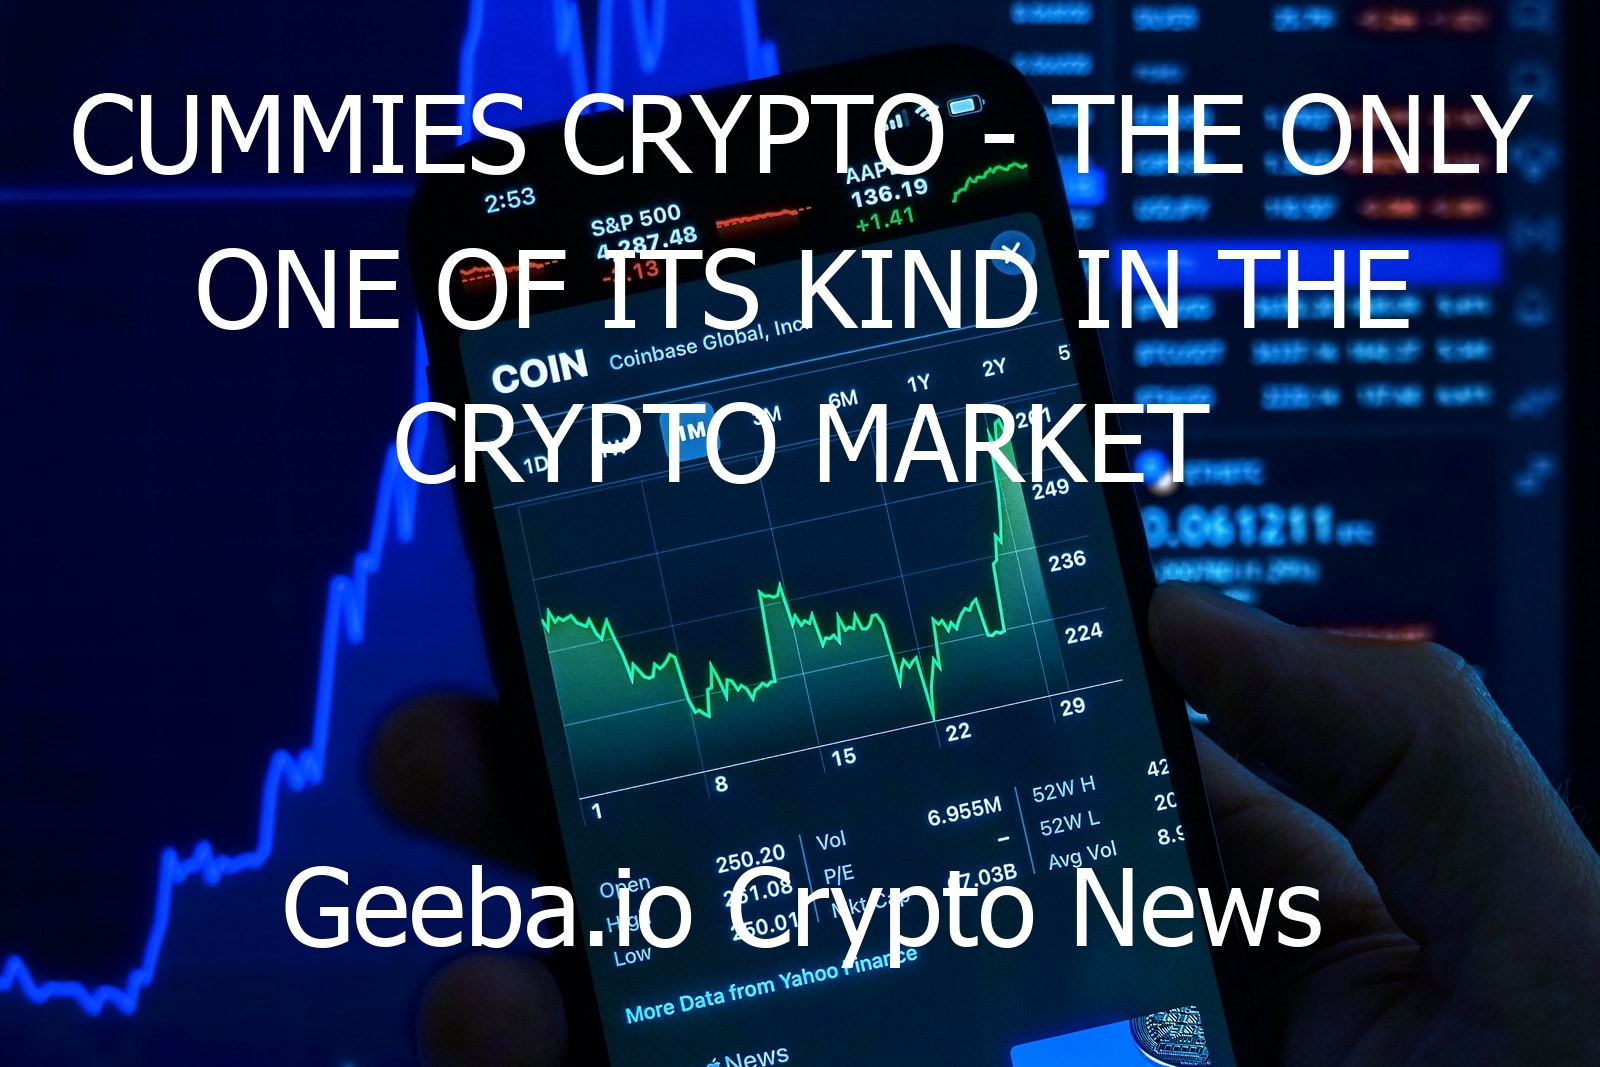 cummies crypto the only one of its kind in the crypto market 5856